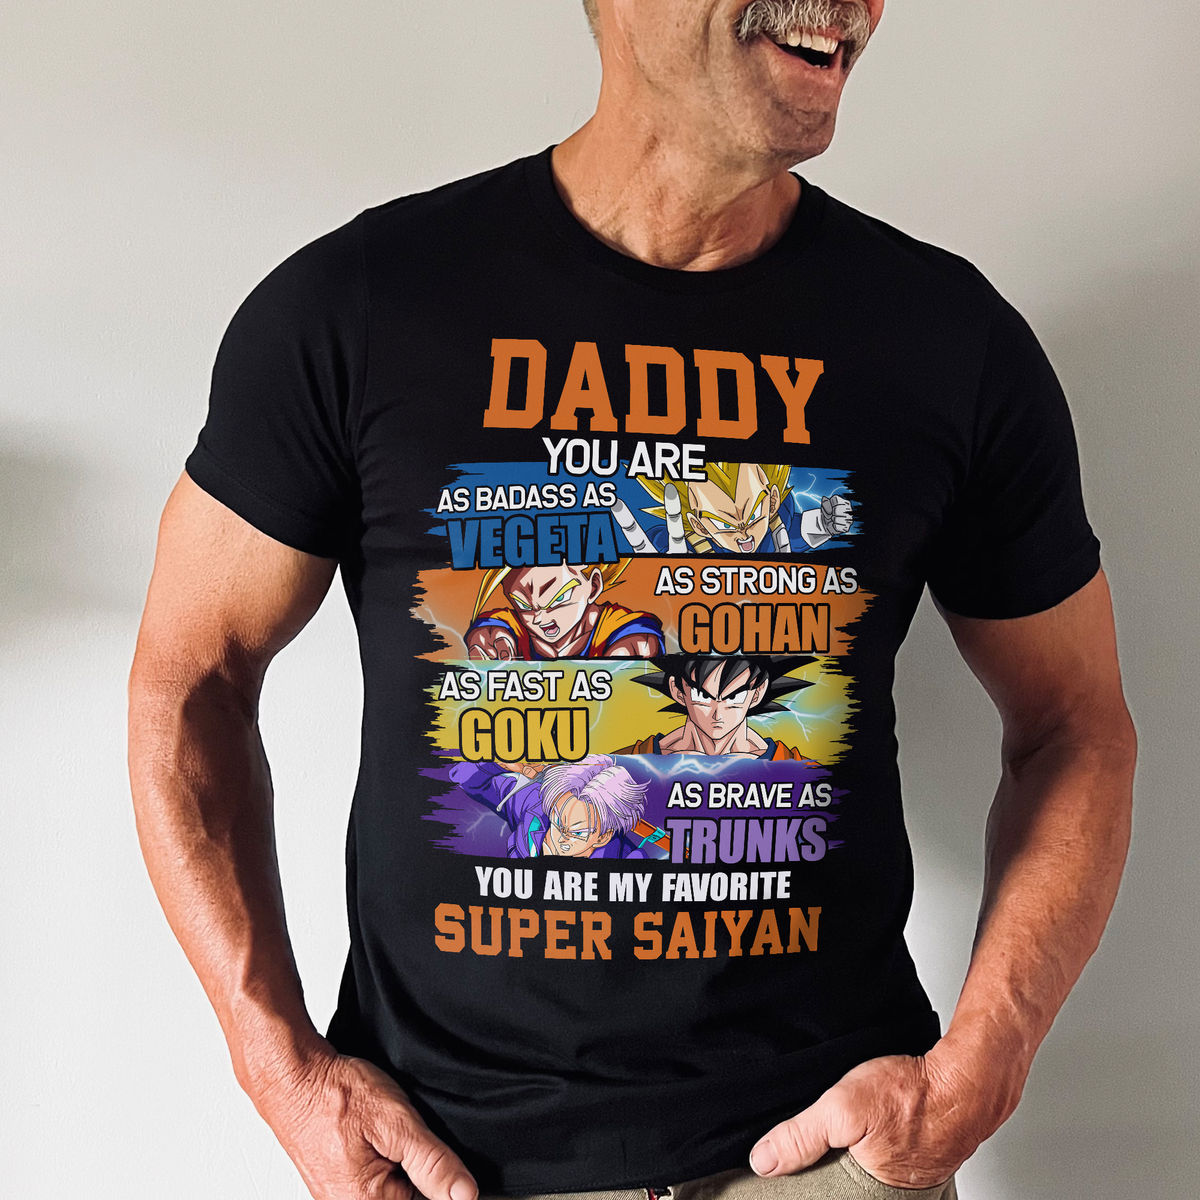 Personalized Shirt - Father's Day T Shirt 2023 - Best Dad ever ever ever - You are As Badass as..._2